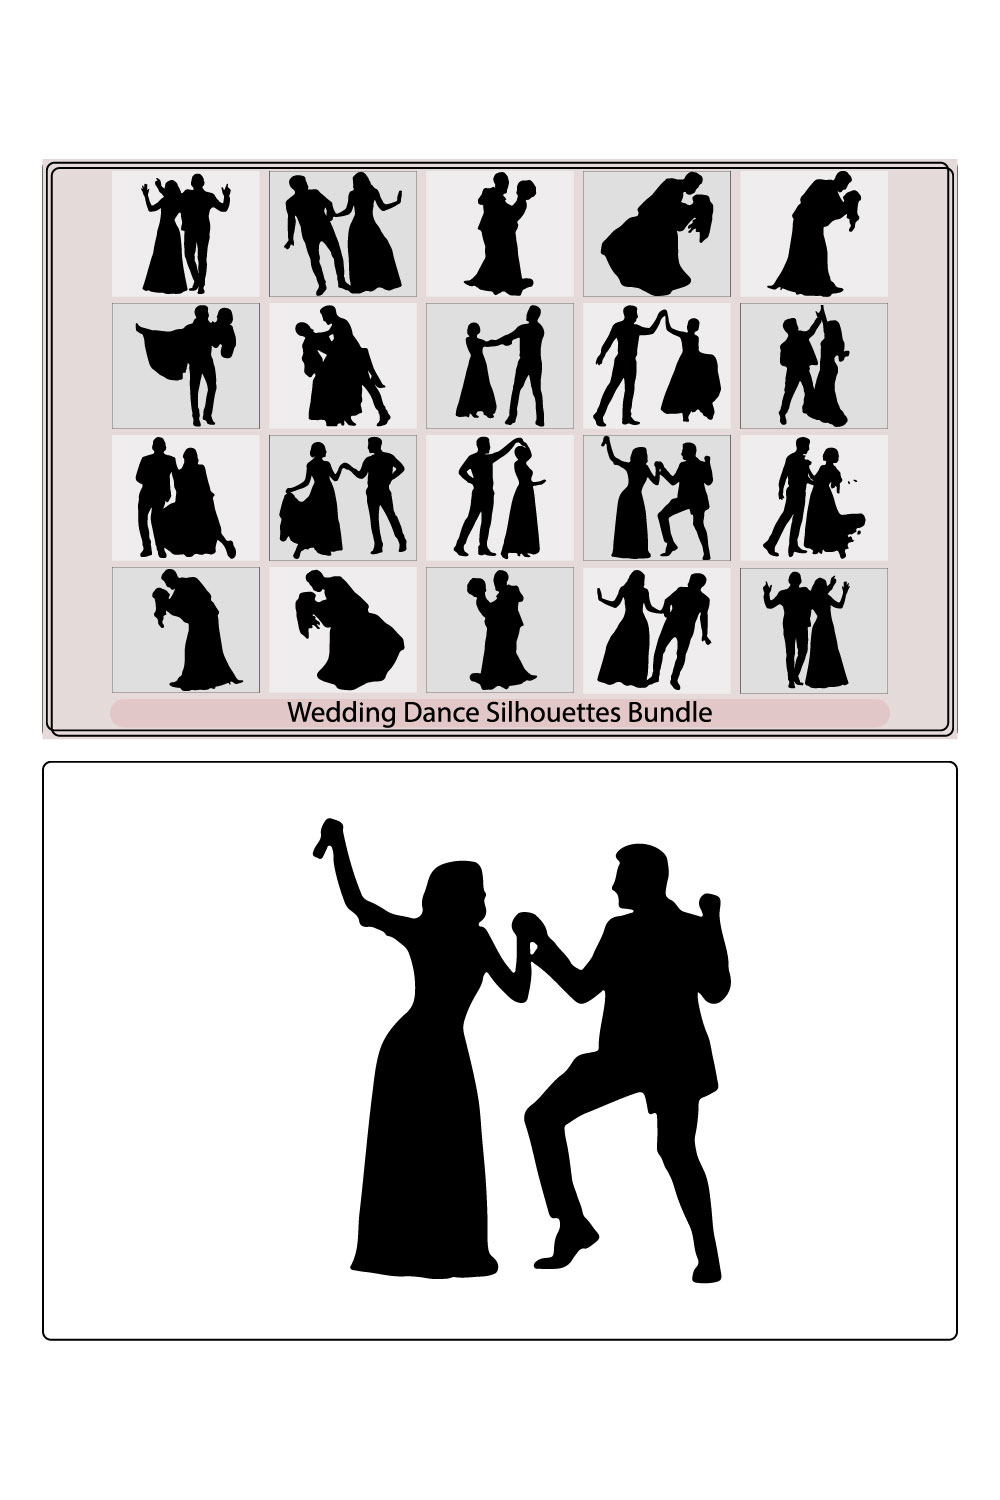 Couple Wedding dancing silhouette,Male And Female Dancing silhouettes Collection,Bride and groom in wedding silhouettes illustration pinterest preview image.